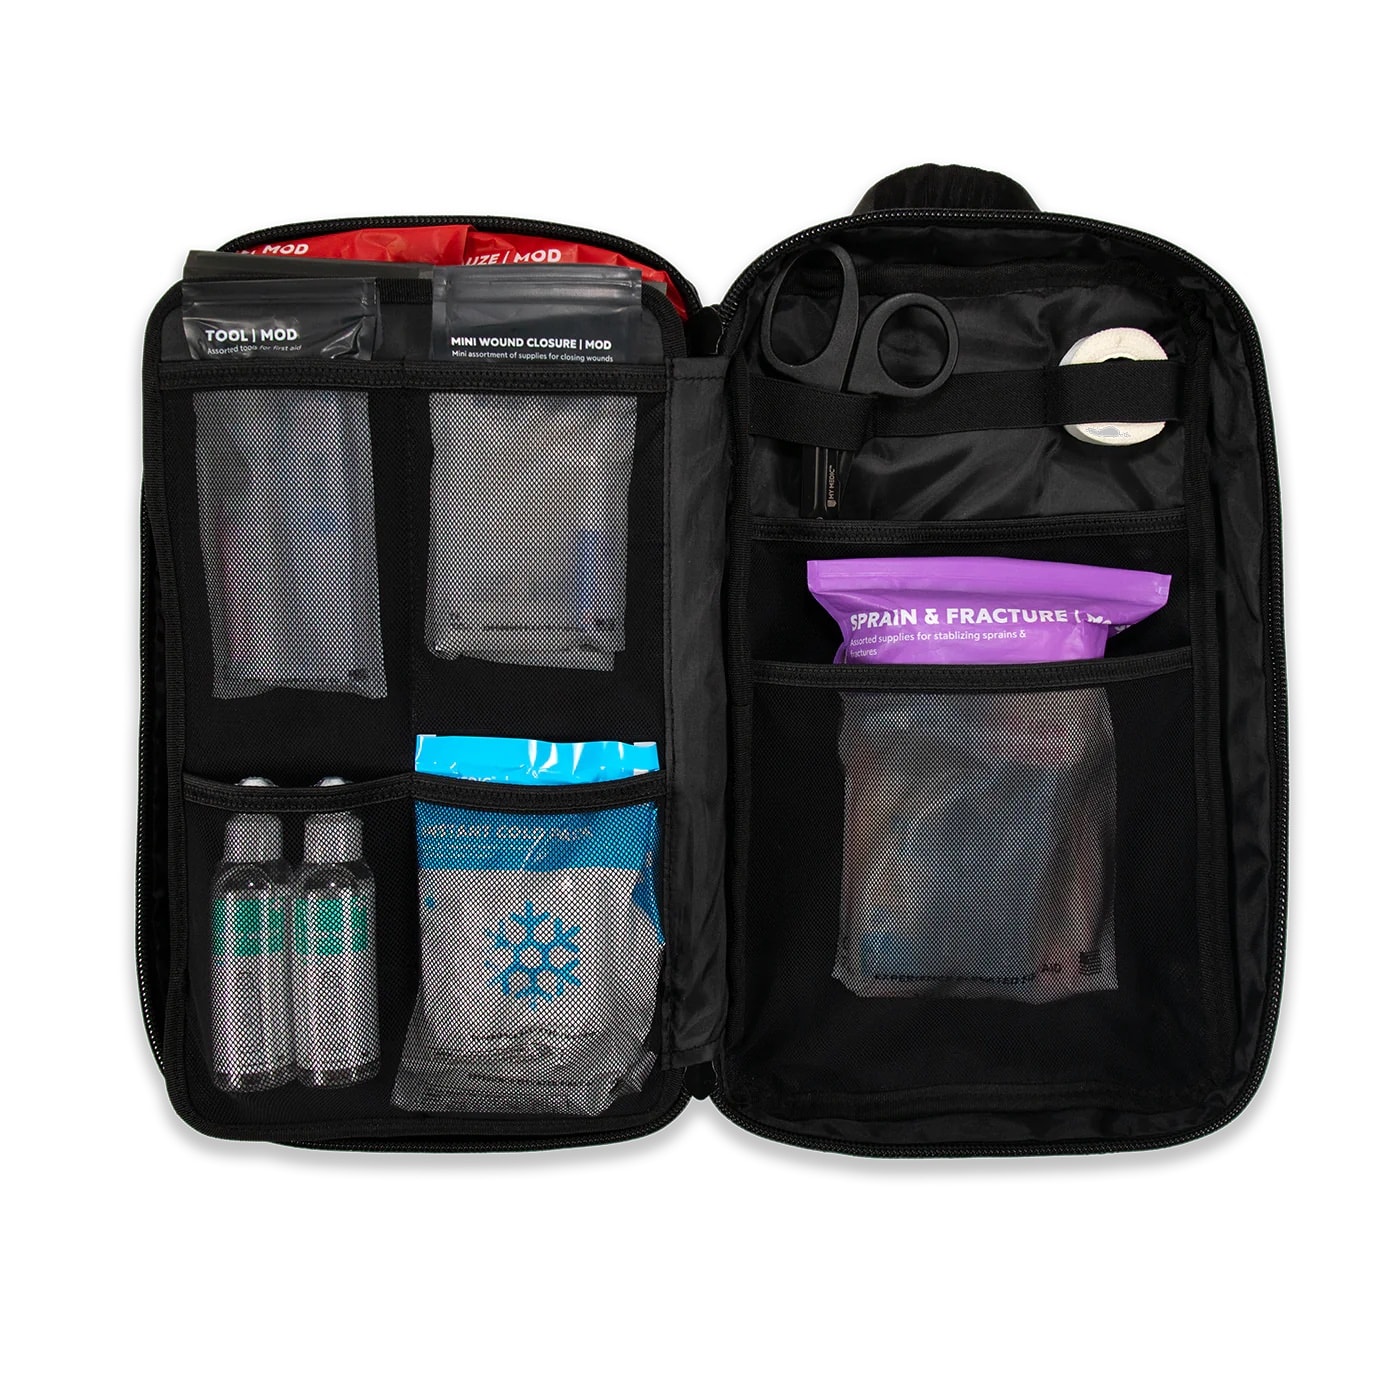 My Medic MyFAK Large Advanced First Aid Kit in Black - Size: Large